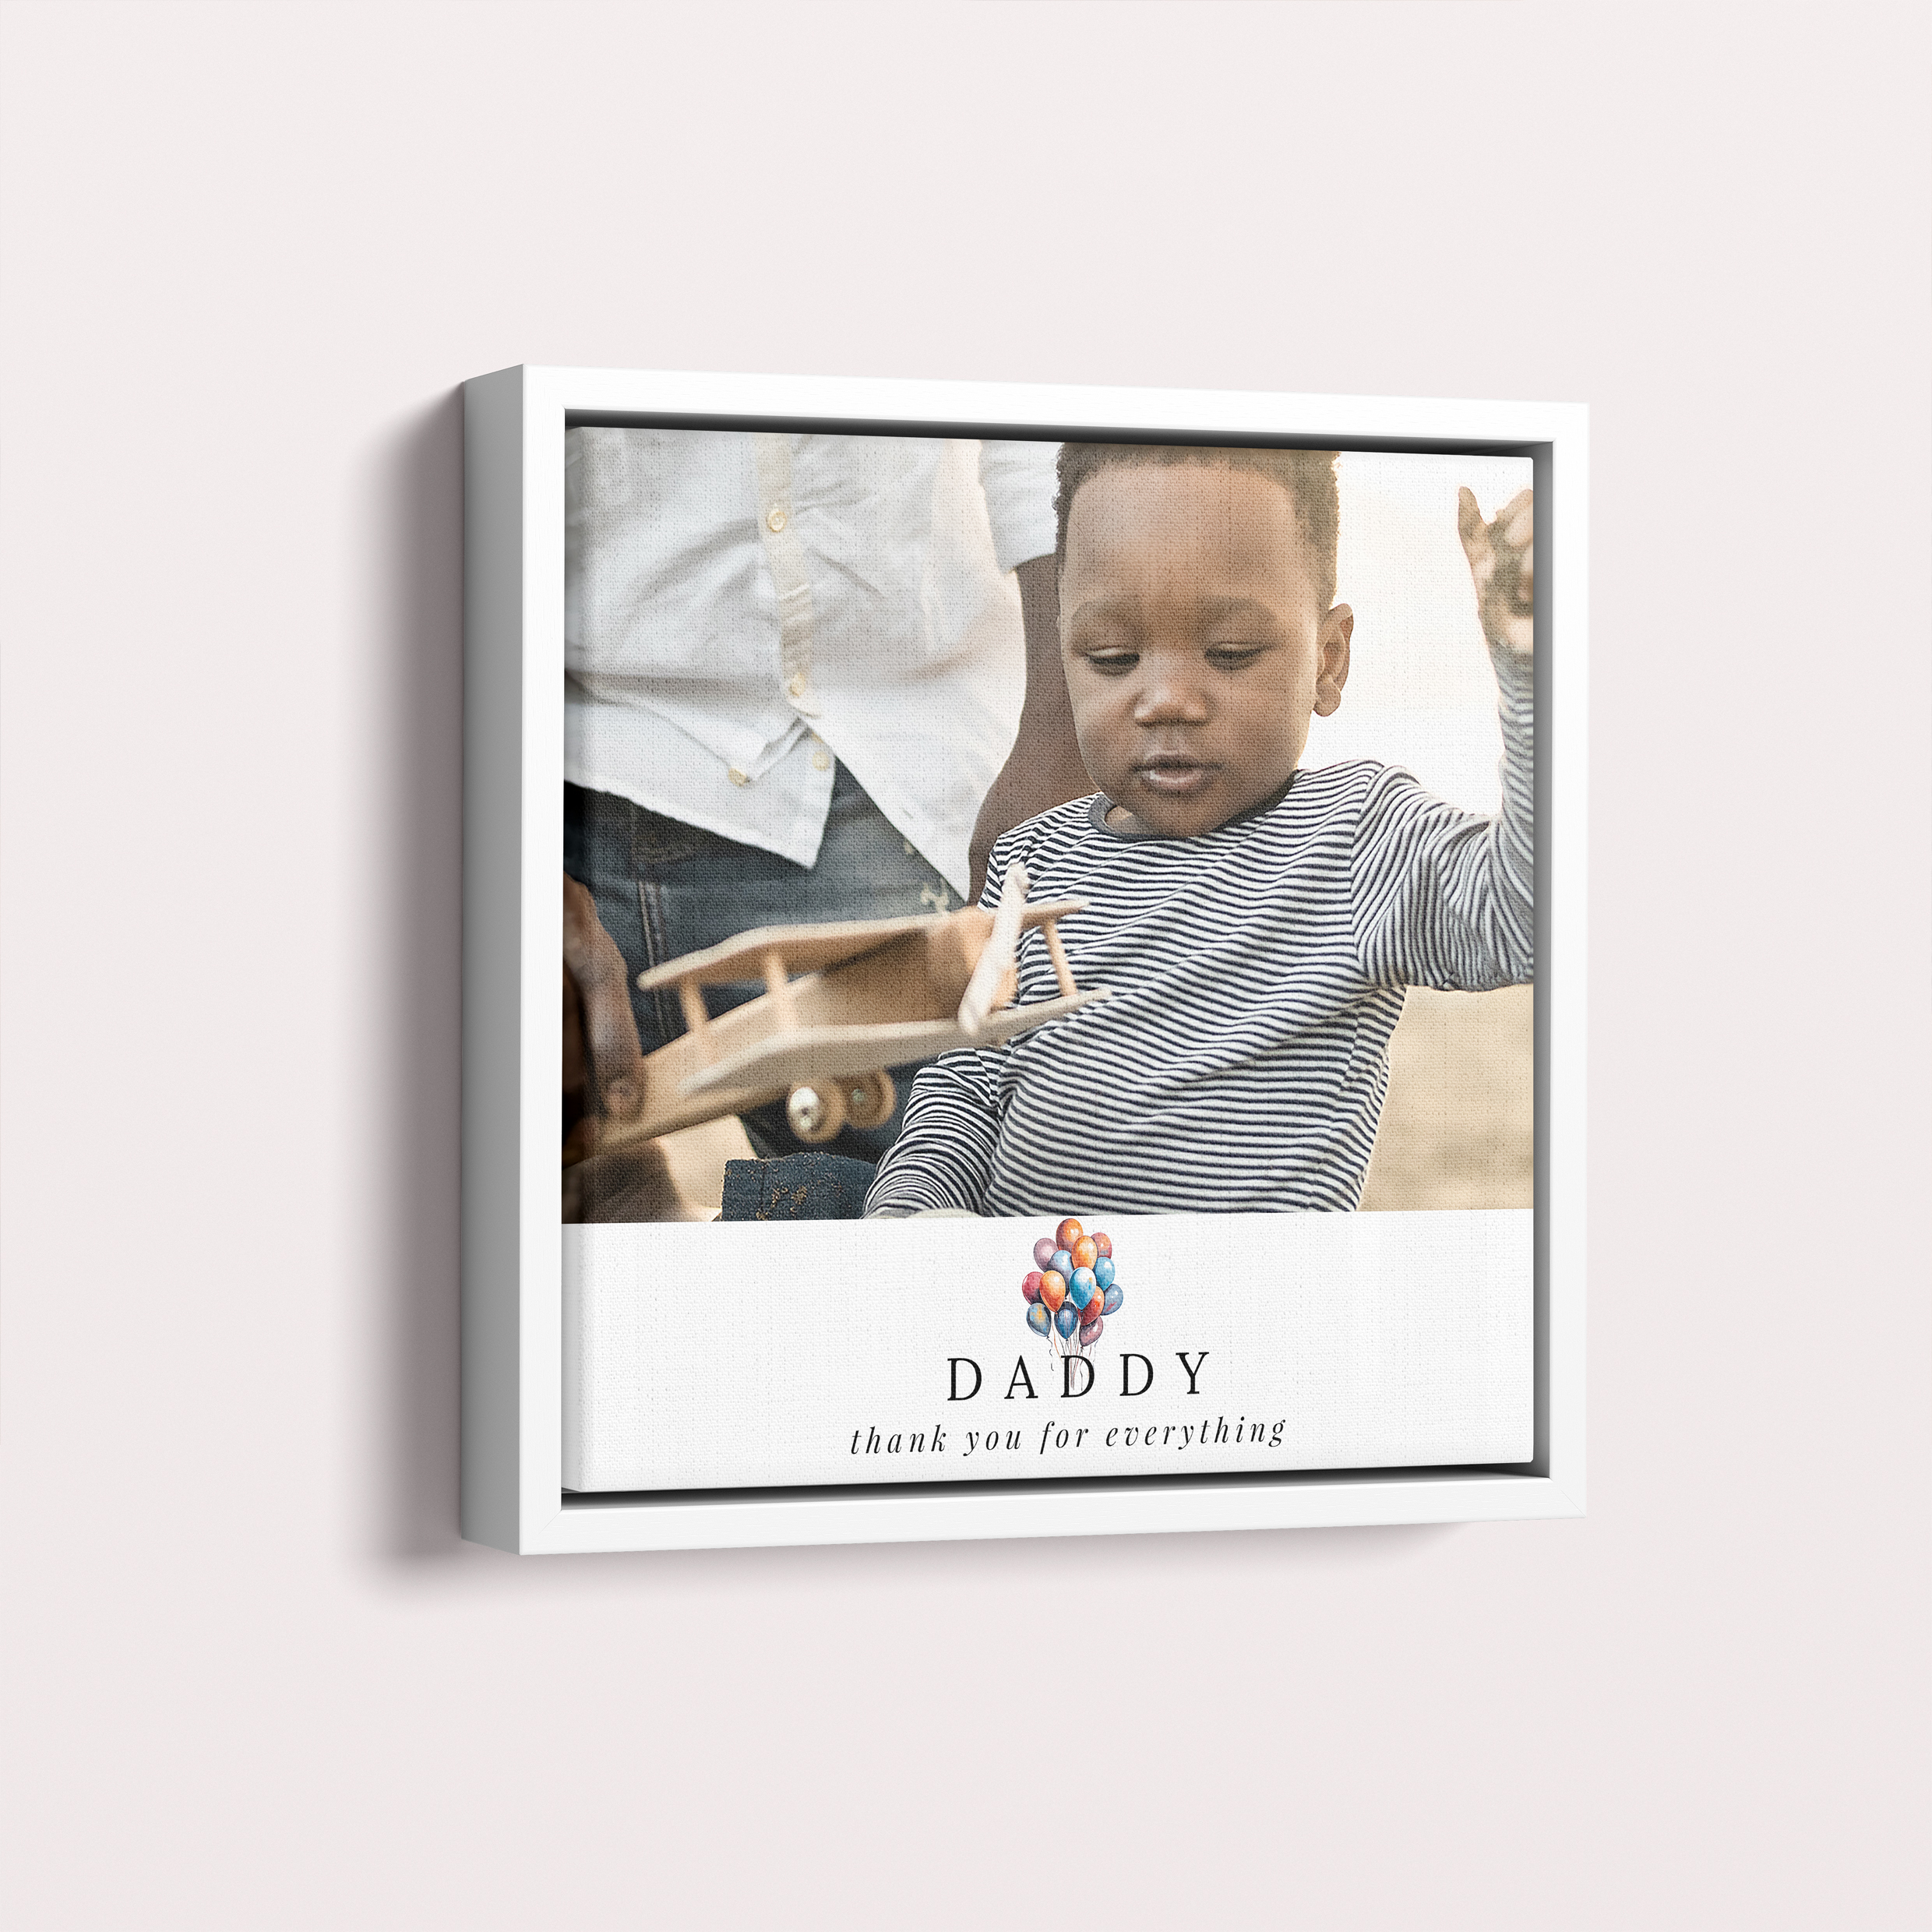 Balloons for Dad Framed Photo Canvases - A stylish portrait display with a responsibly-sourced wooden frame, capturing the essence of cherished memories.